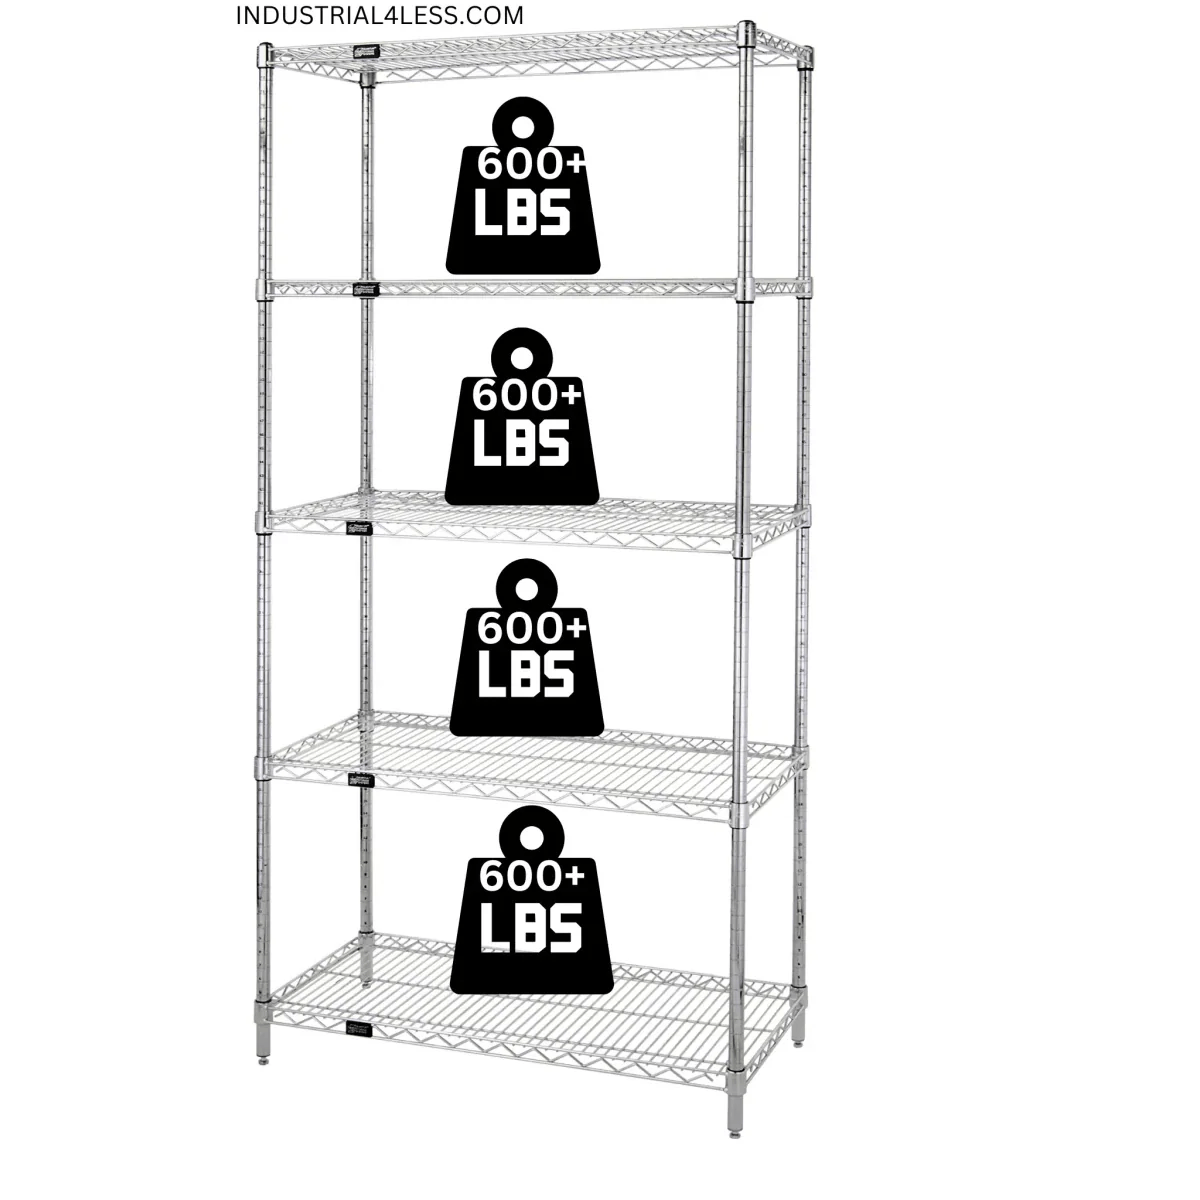 14" x 48" Stainless Steel Wire Shelving Unit - Industrial 4 Less - 14485S-5